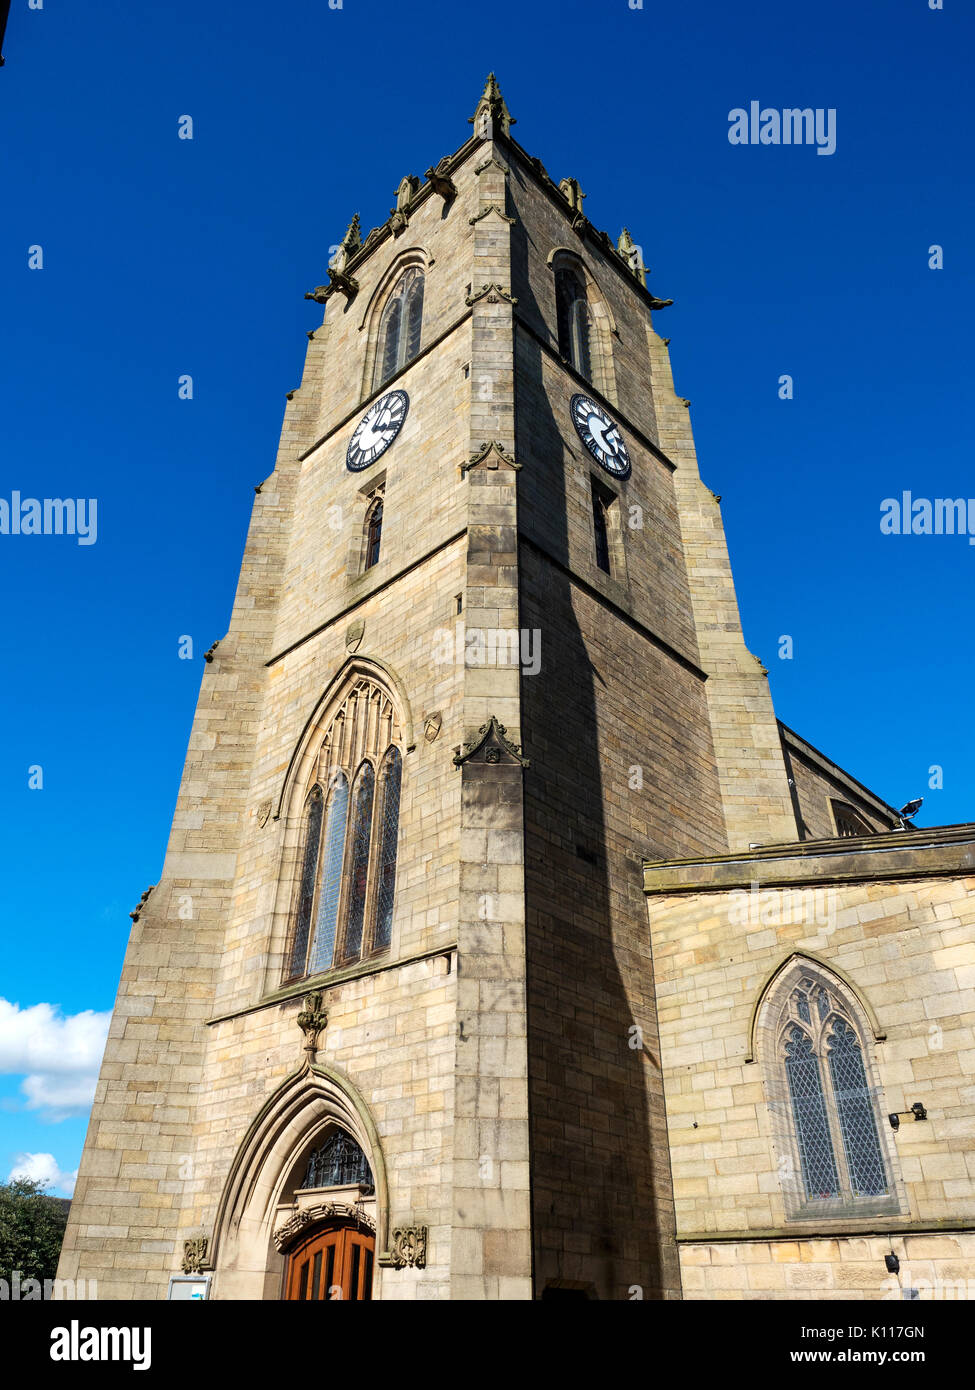 Keighley Chiesa condivisa in Church street a Keighley West Yorkshire Inghilterra Foto Stock